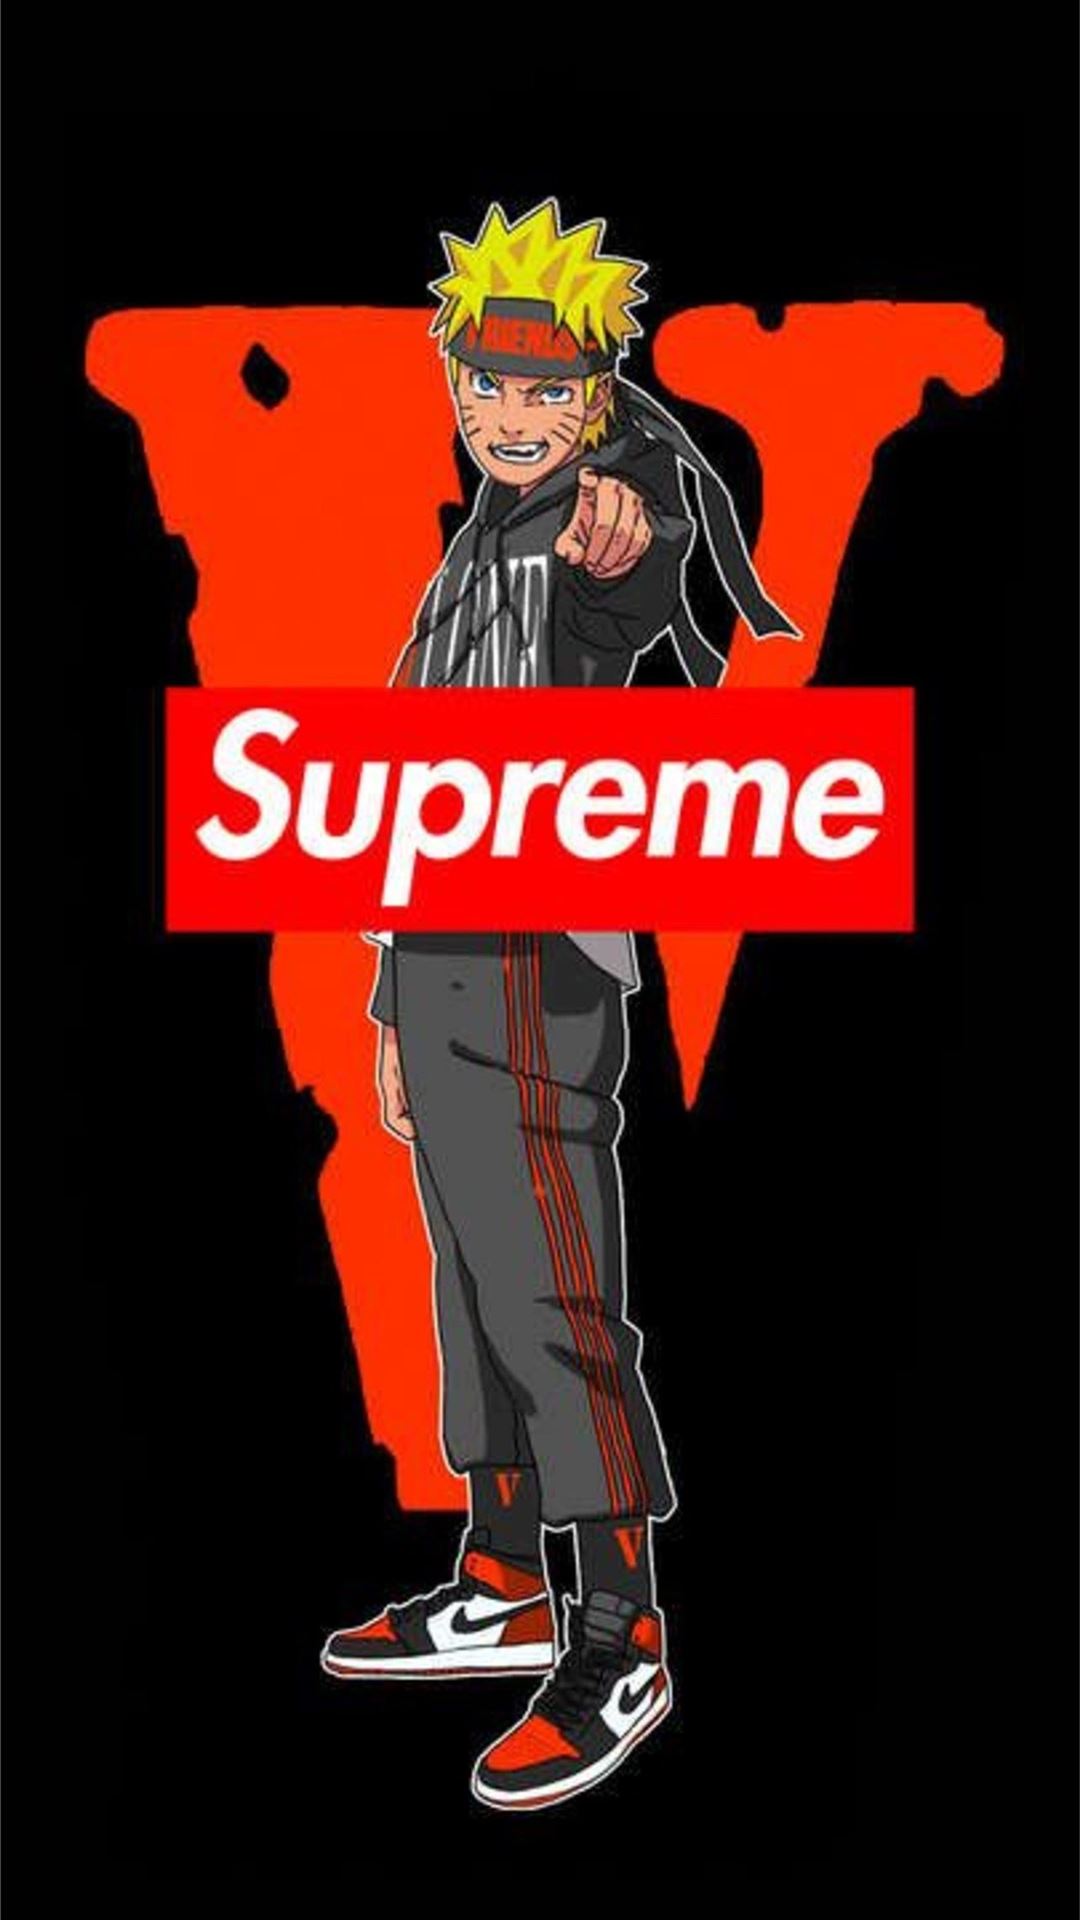 Naruto Iphone 8 Wallpapers